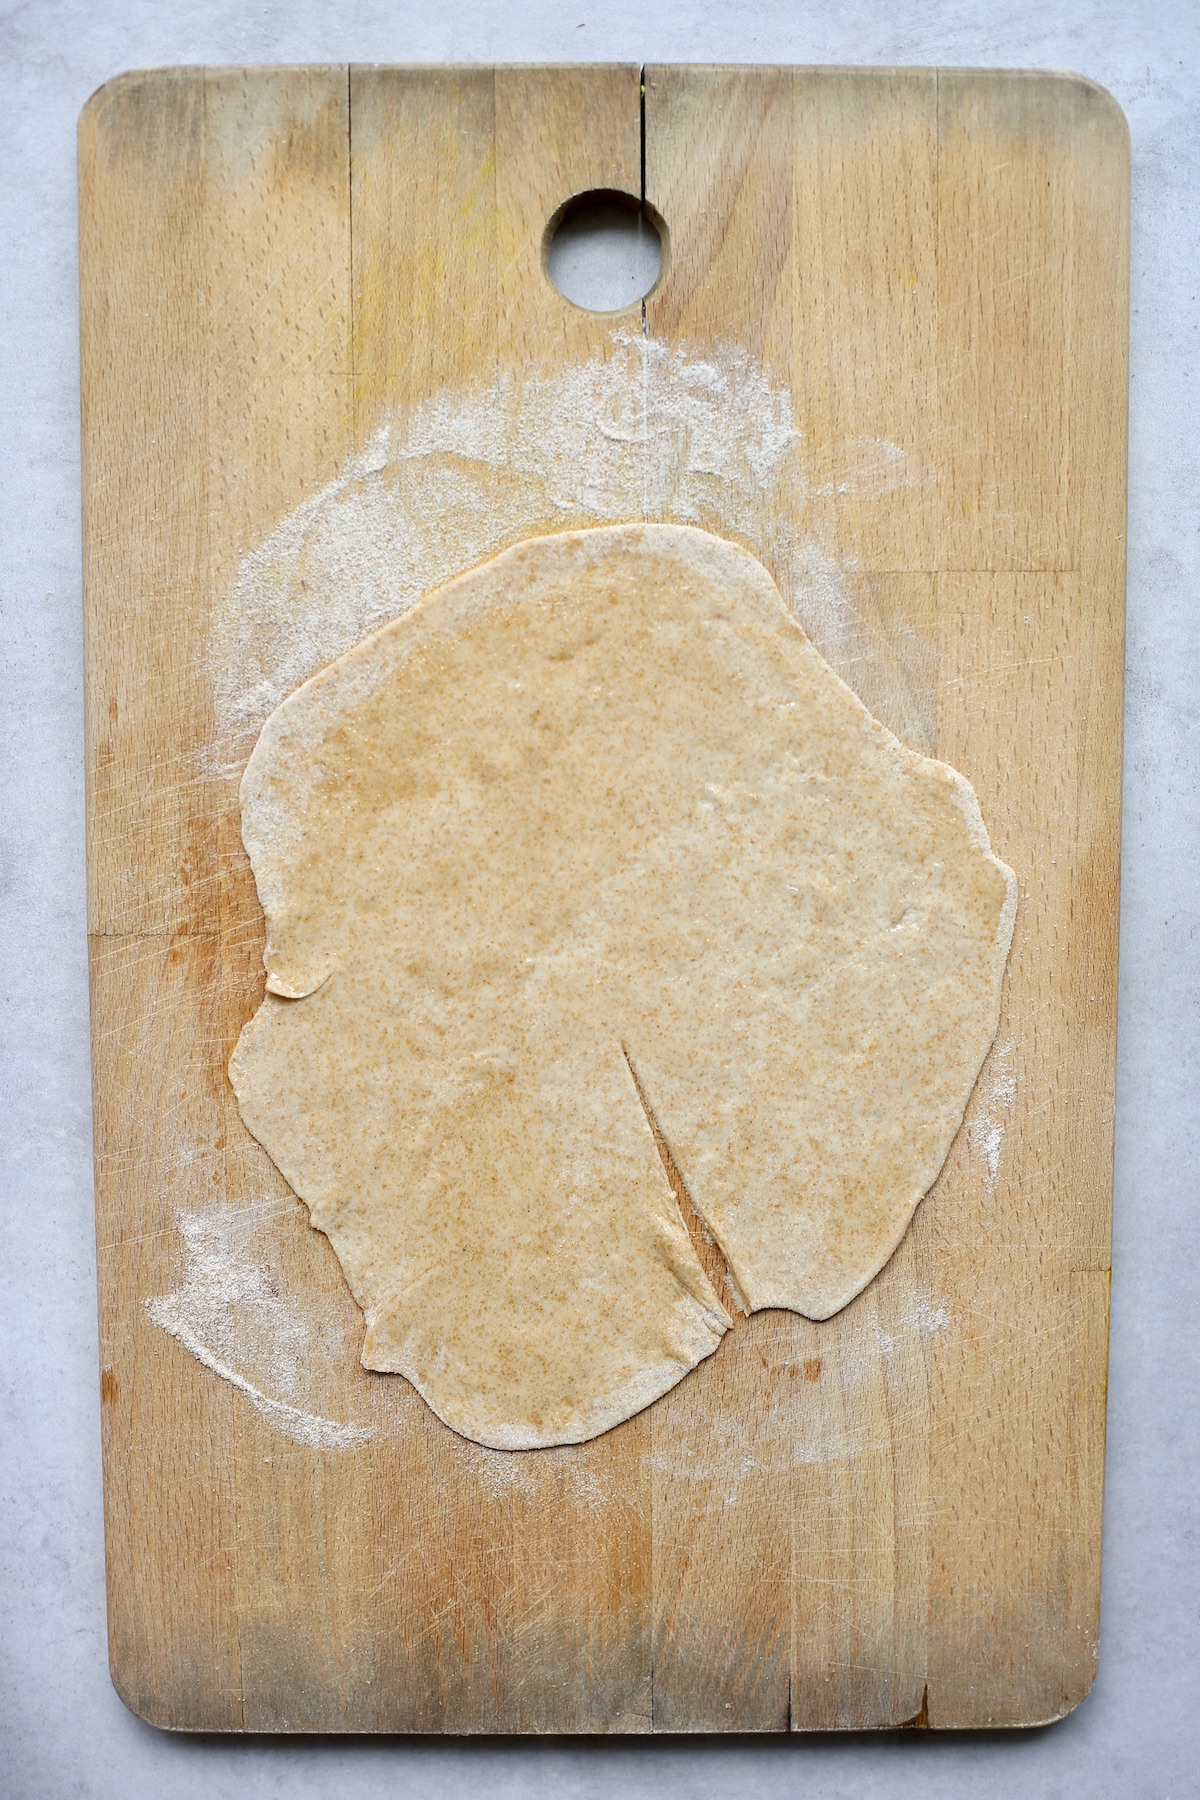 A thin circle of chapati dough rolled out on a floured wooden cutting board with a thin slice cut from the center to the edge. 